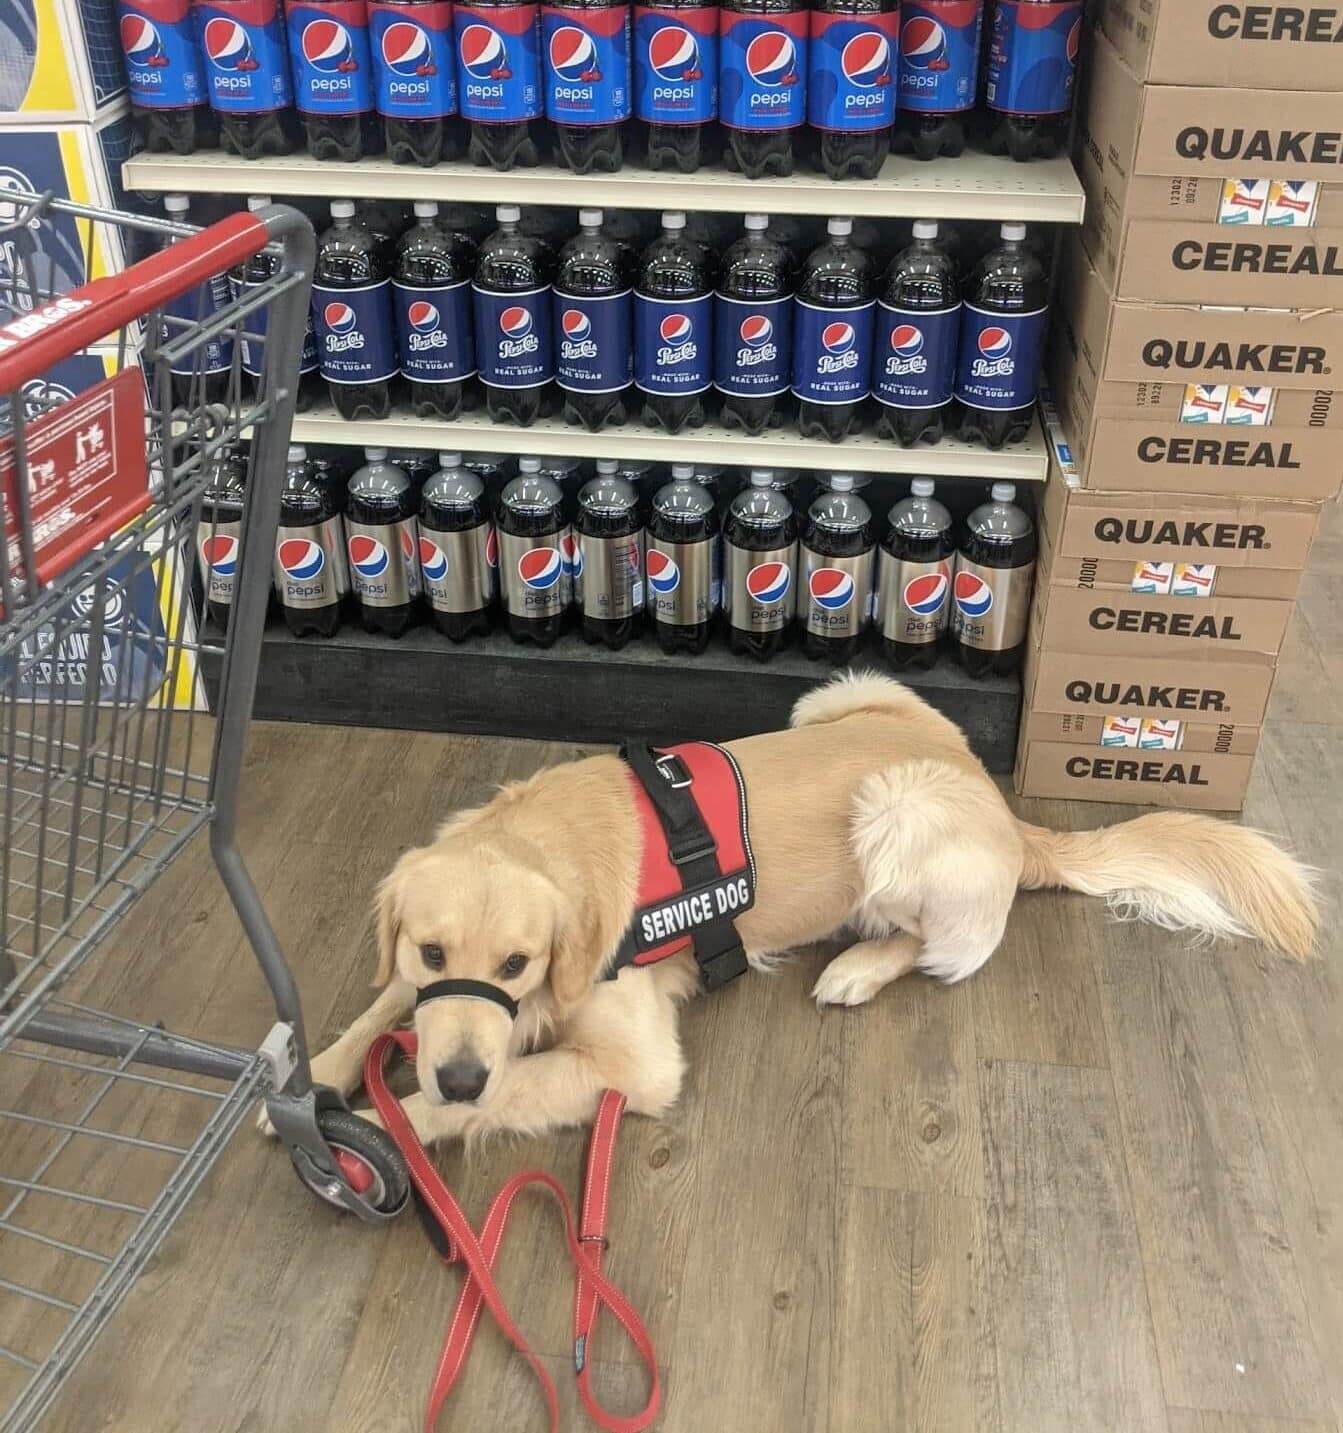 Psychiatric Service Dog Training in a food store